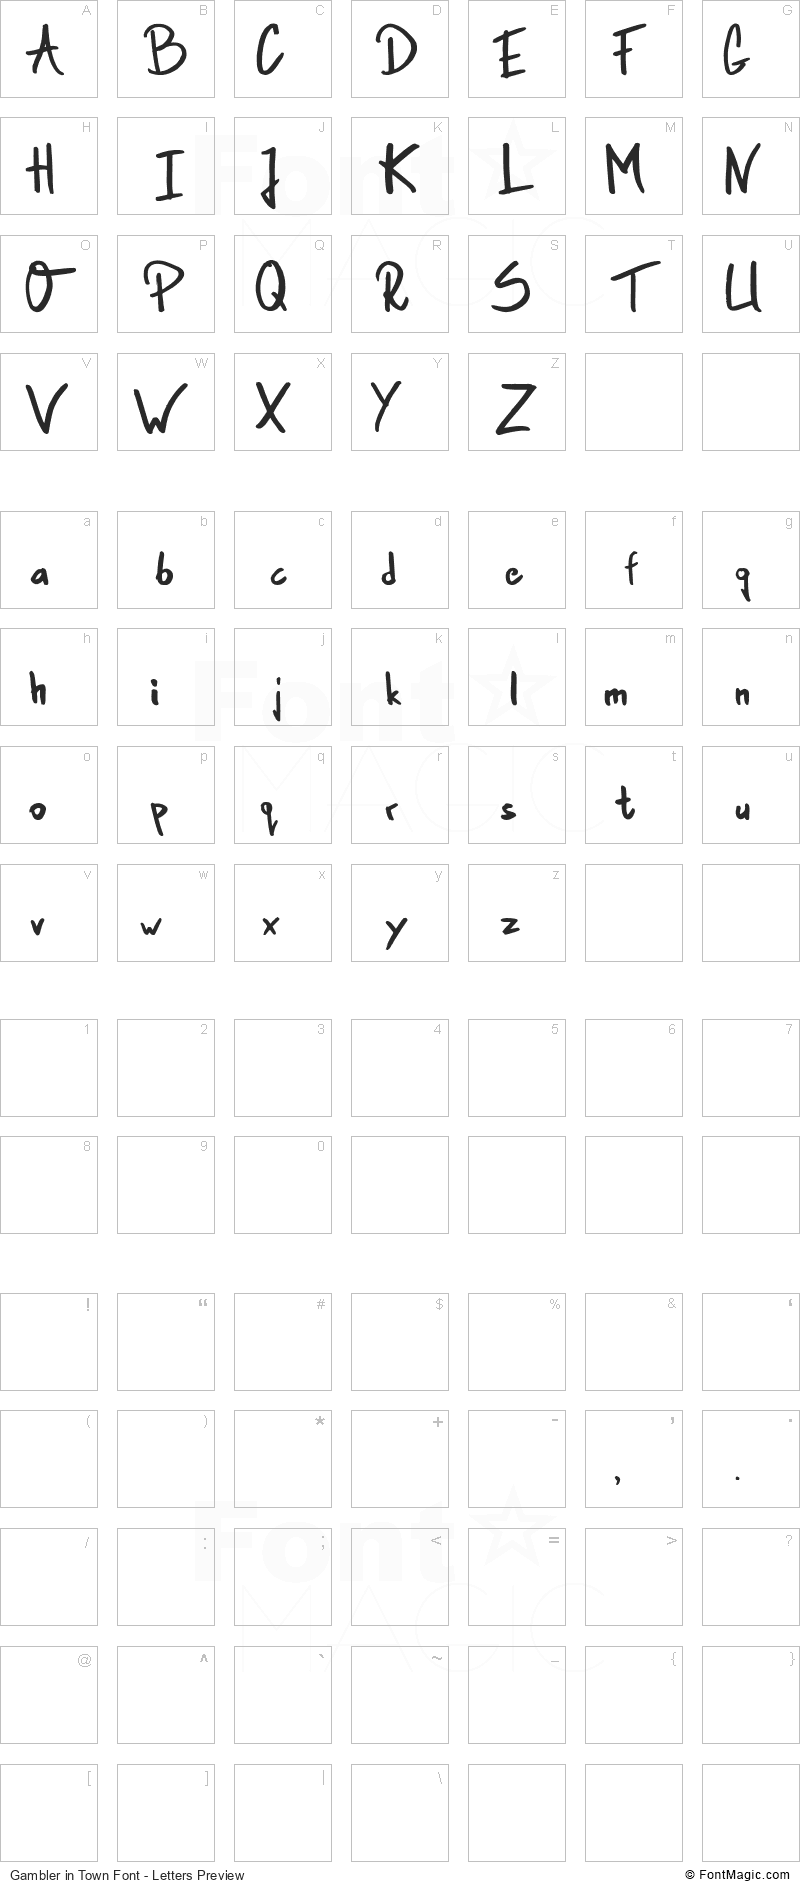 Gambler in Town Font - All Latters Preview Chart